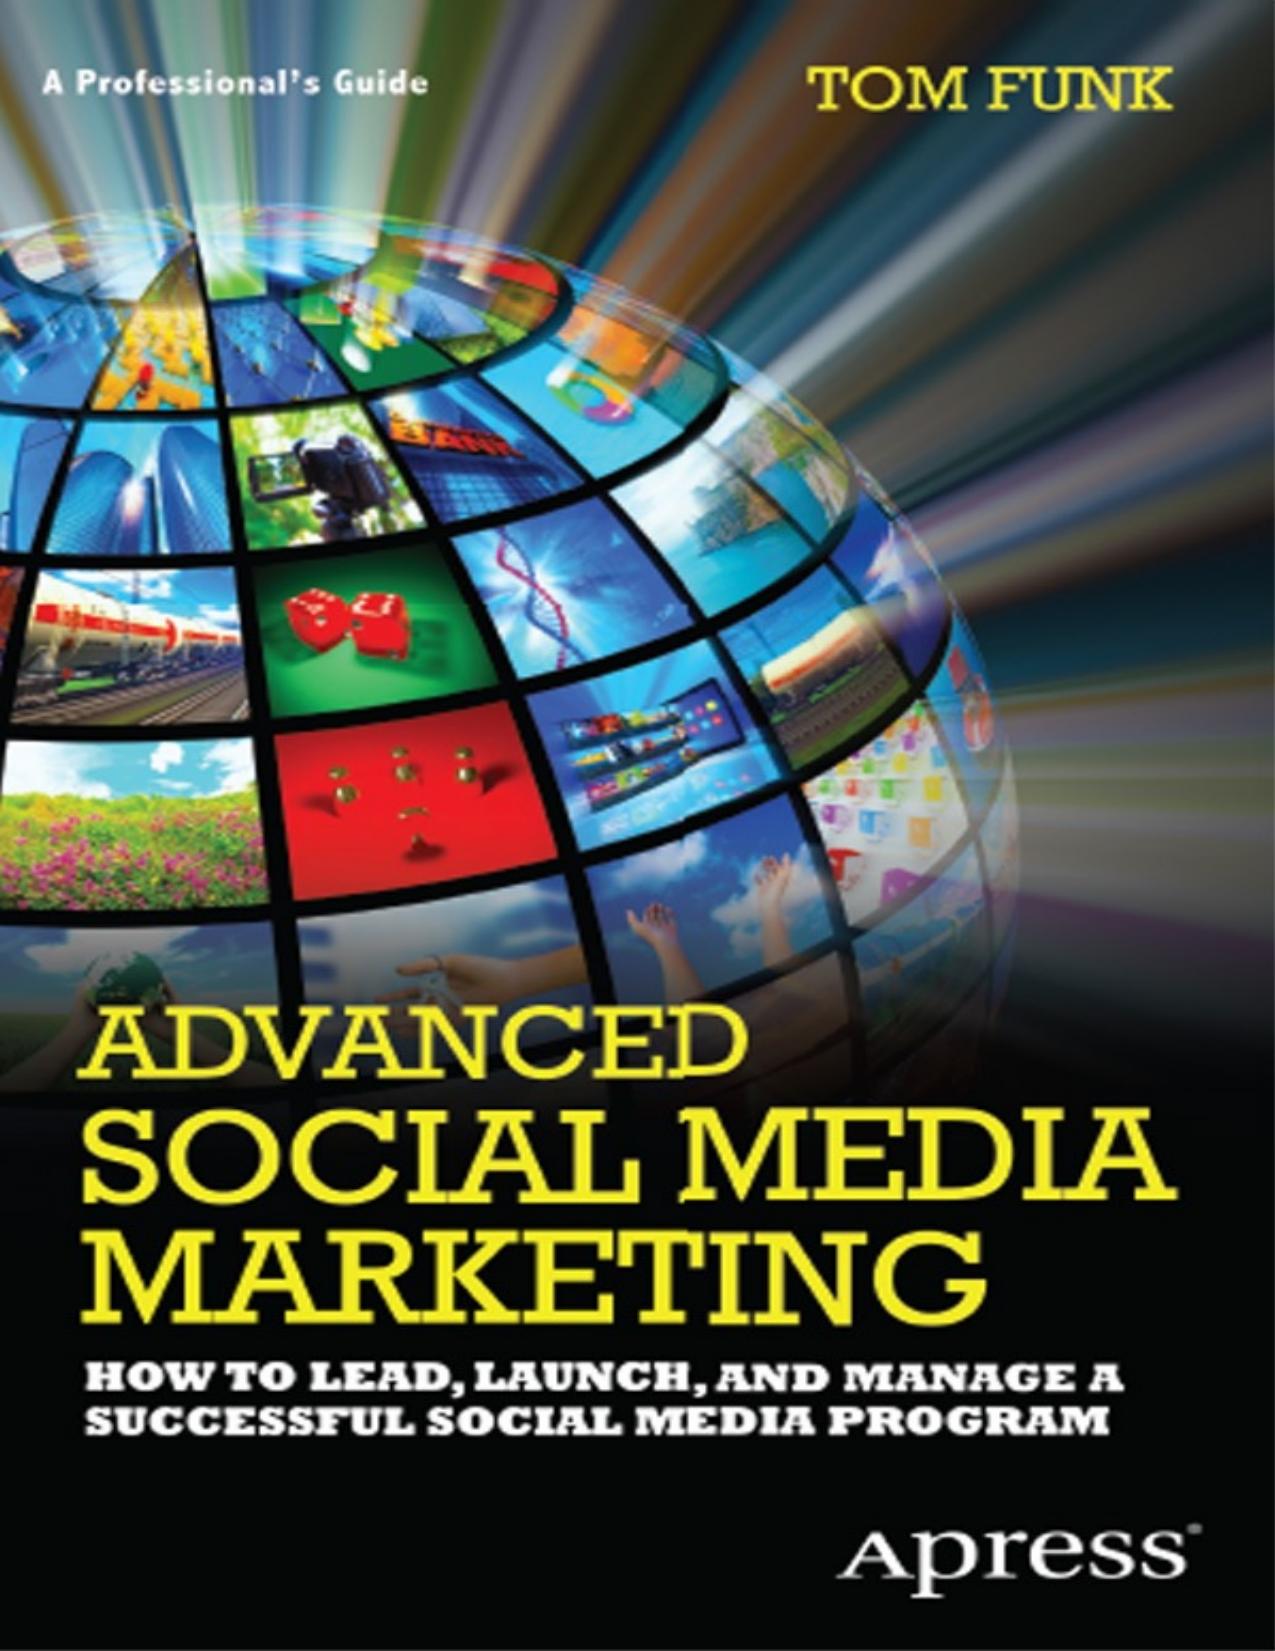 Advanced Social Media Marketing: How to Lead, Launch, and Manage a Successful Social Media Program - PDFDrive.com